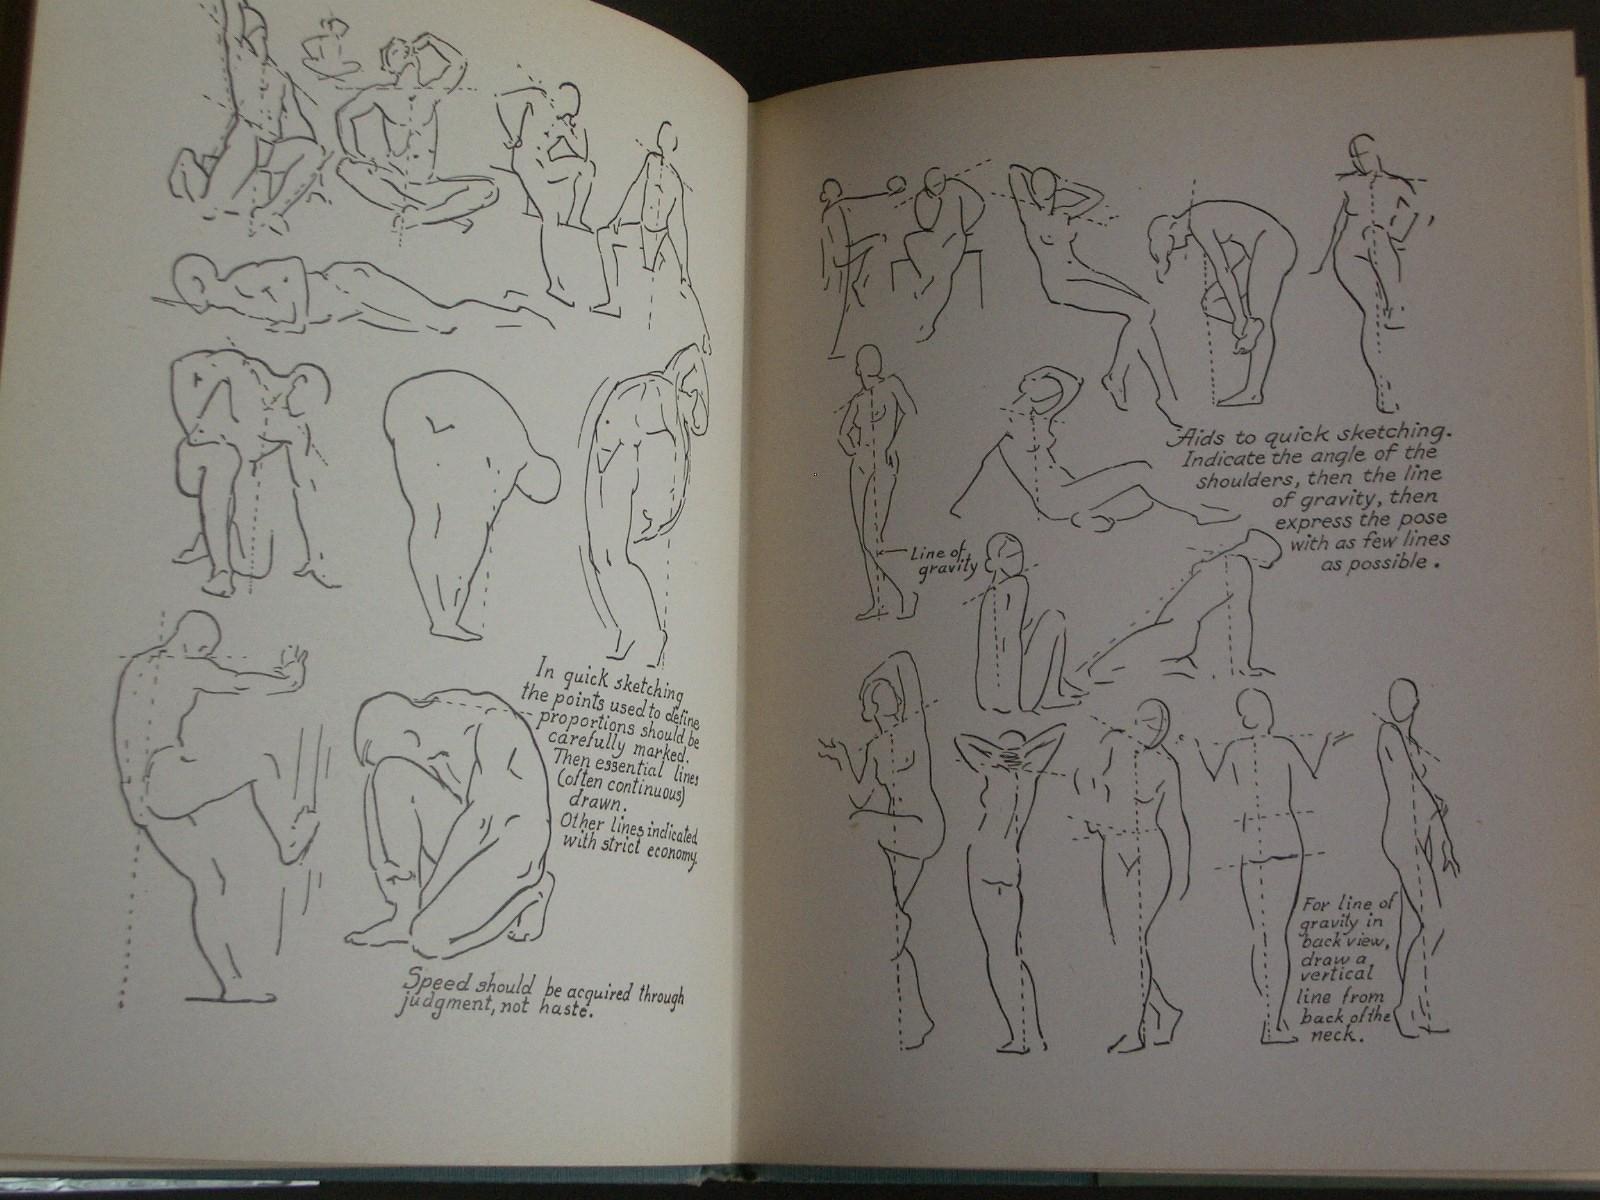 anatomy and drawing victor perard